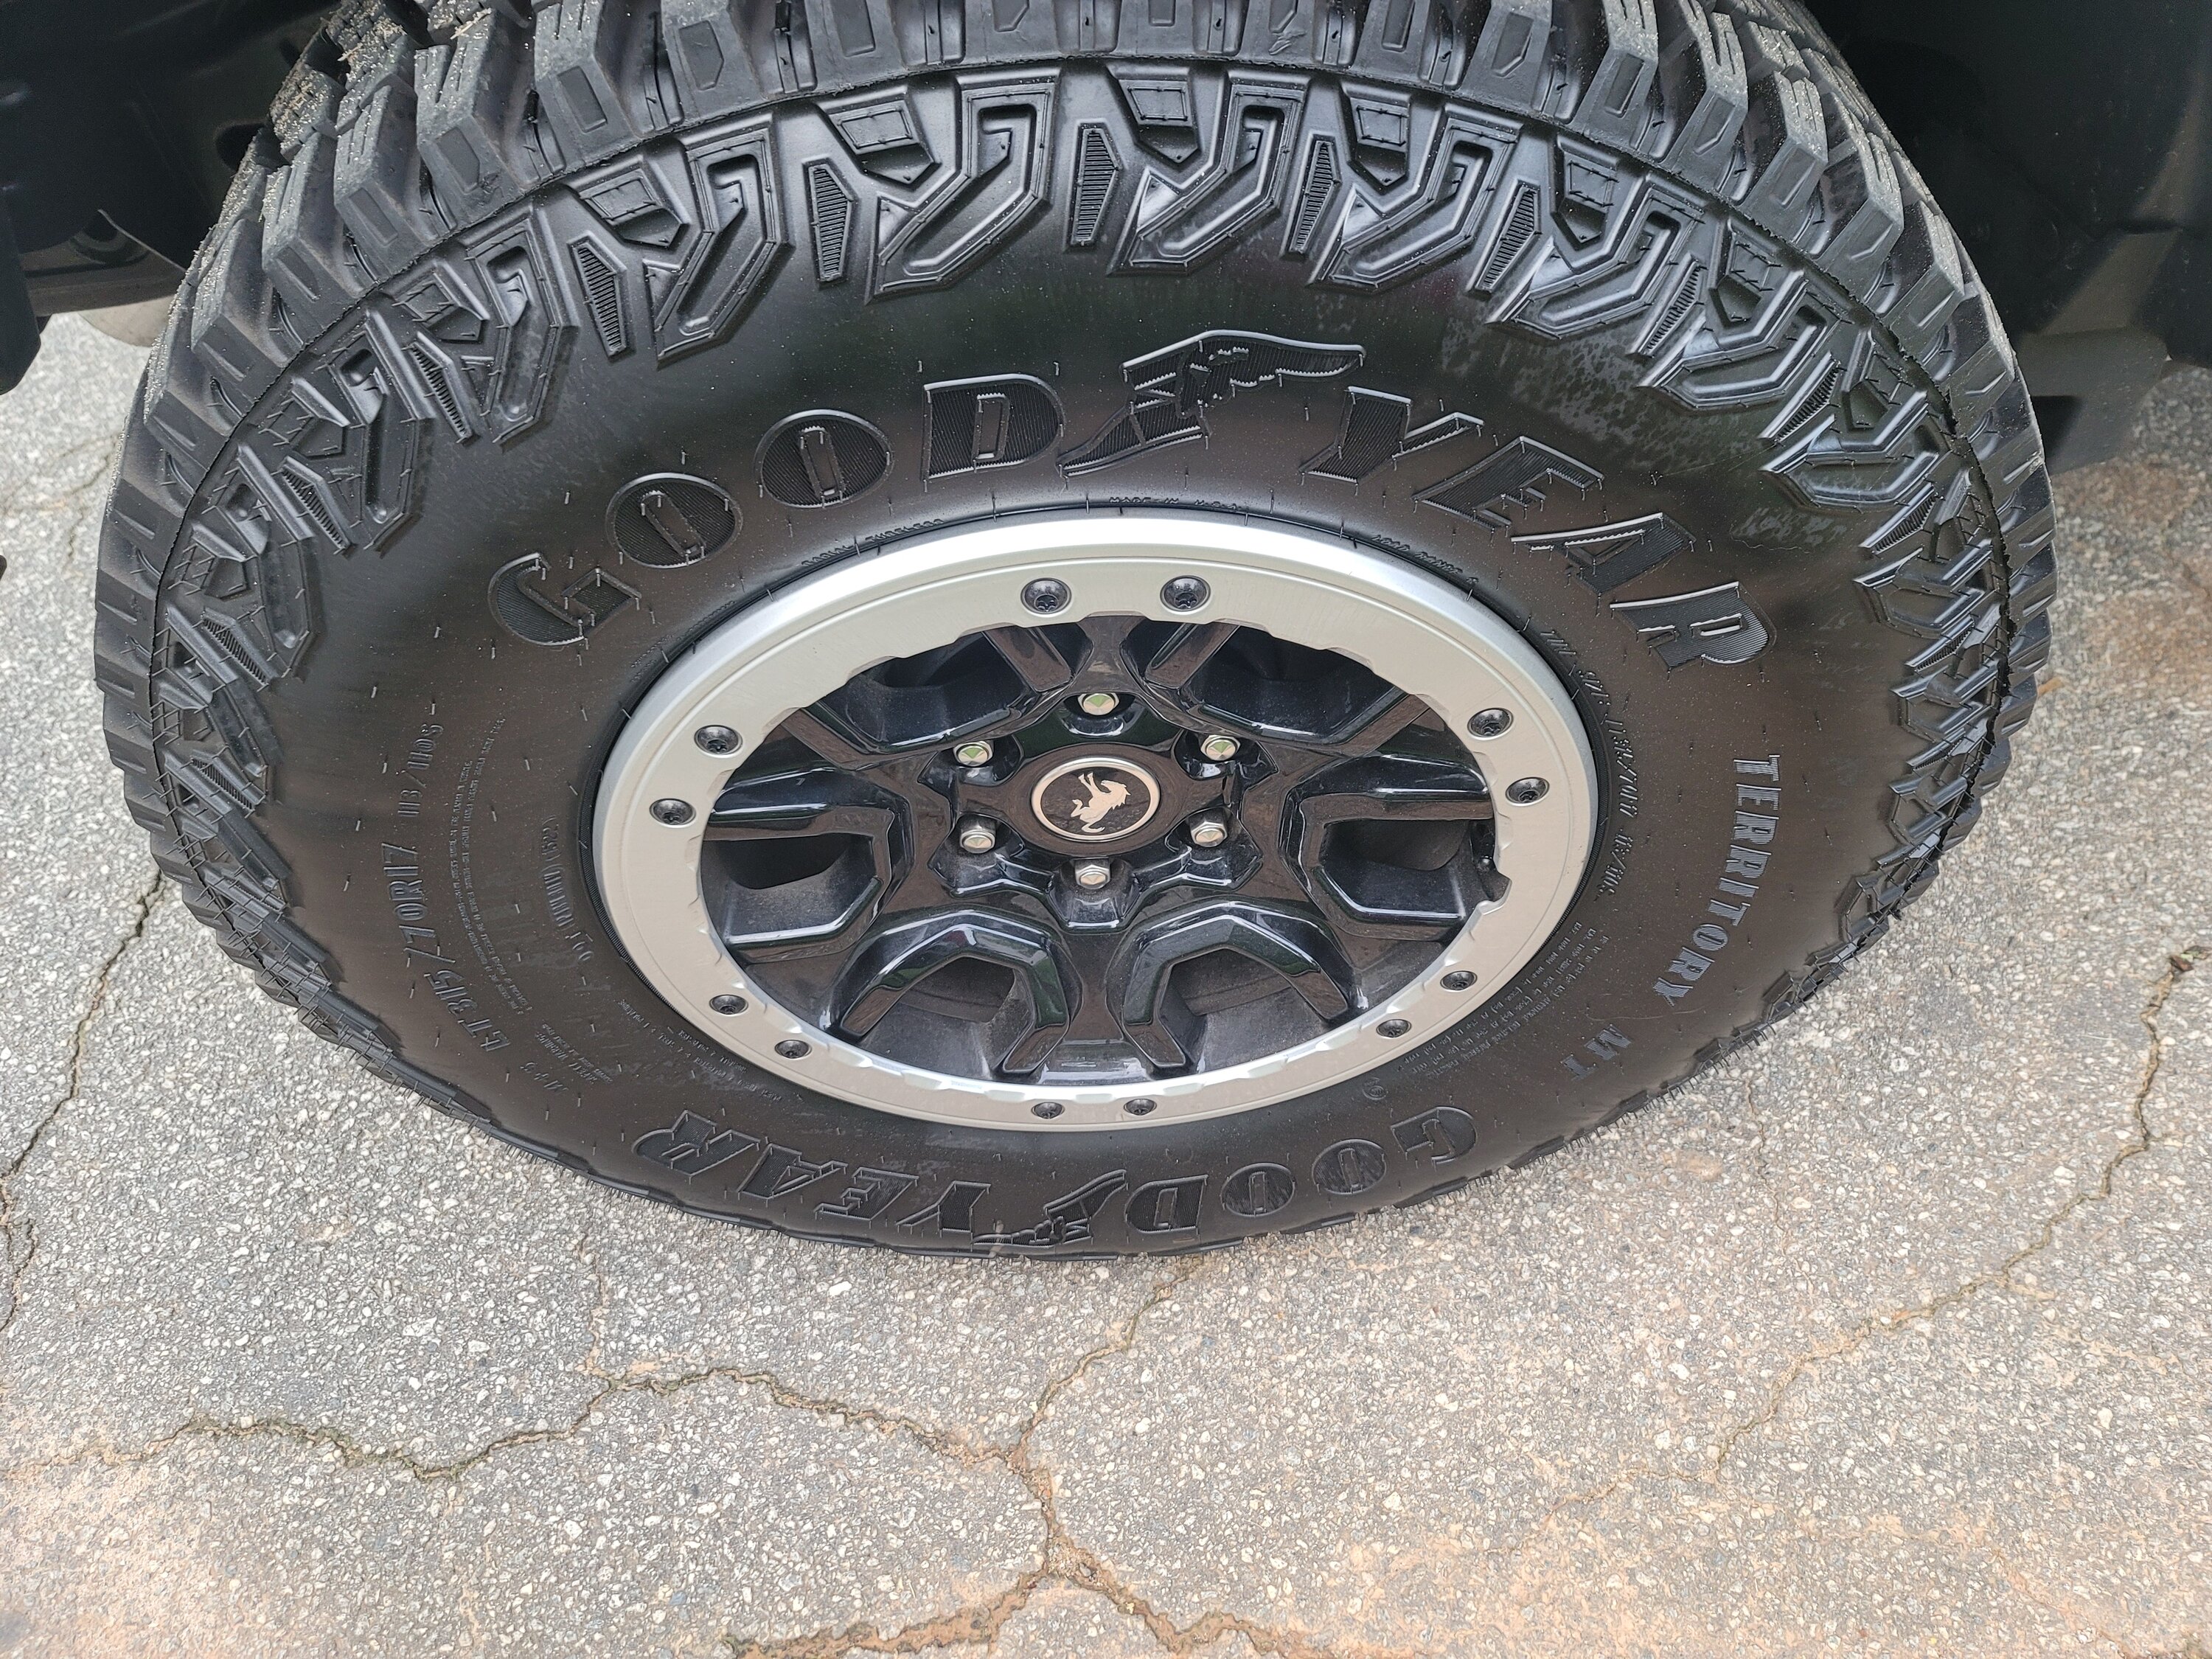 Ford Bronco Sasquatch Wheels and Tires - (Full Set Of 5) -- $1,800 20220811_080354